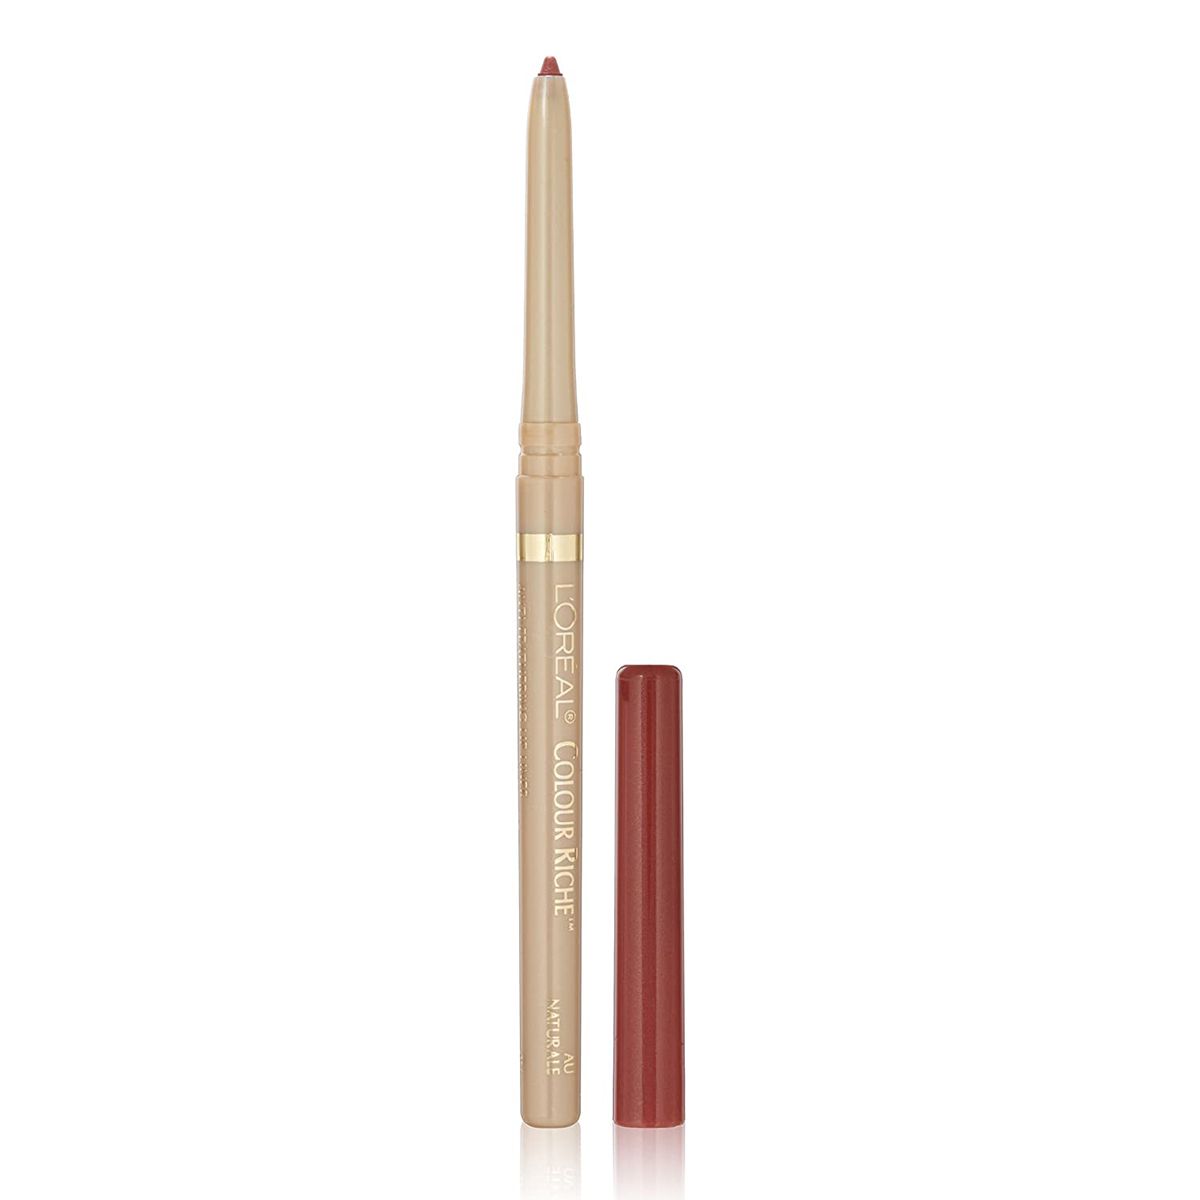 The 15 Best Drugstore Lip Liners for Fuller-Looking Lips | Who What Wear